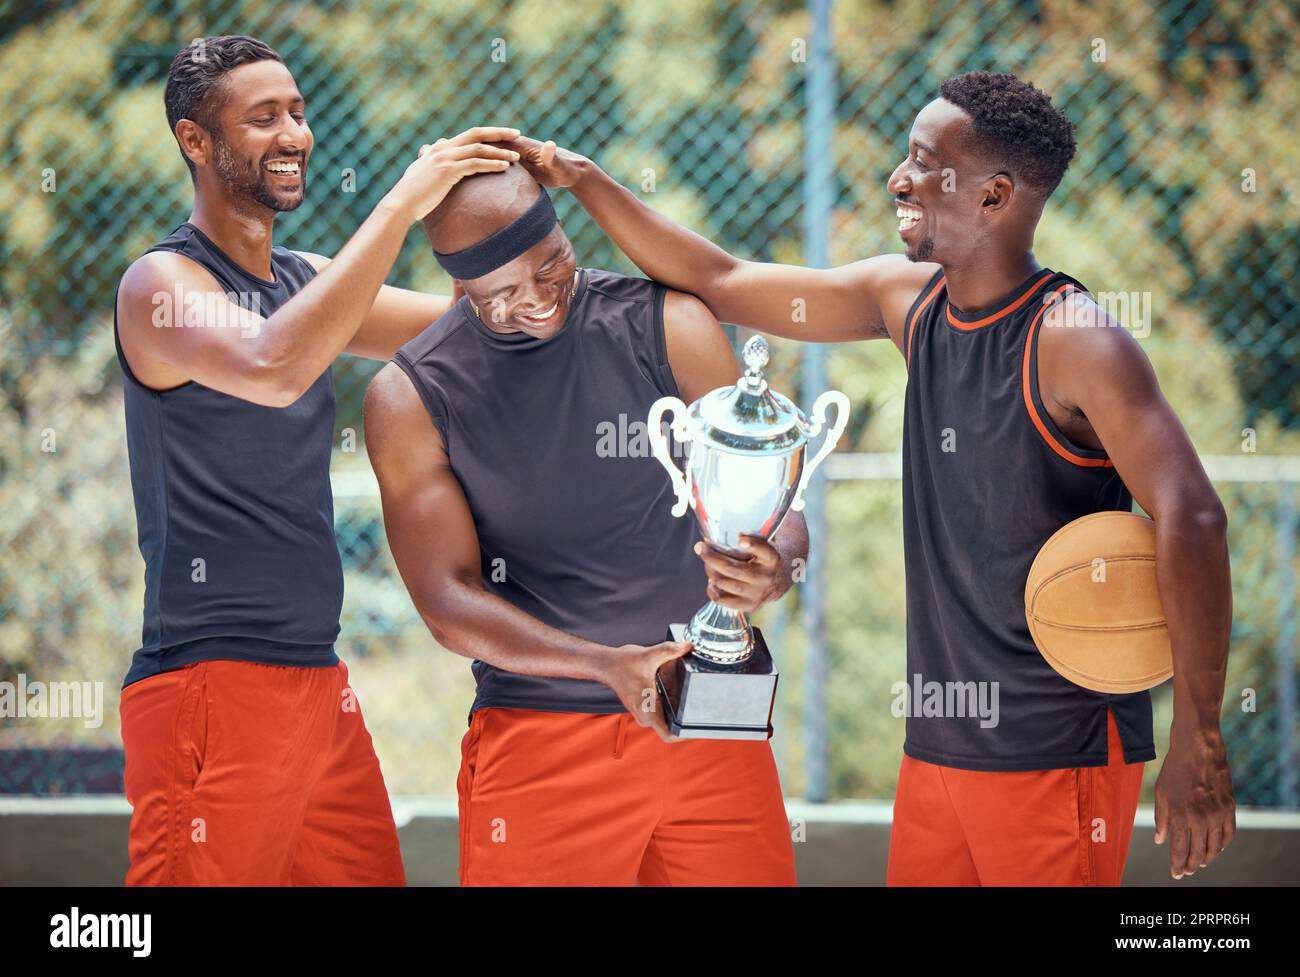 Basketball game, team sports and trophy winner in sport competition on court, collaboration for winning and teamwork for success in event. African athlete celebrate prize and champion achievement Stock Photo